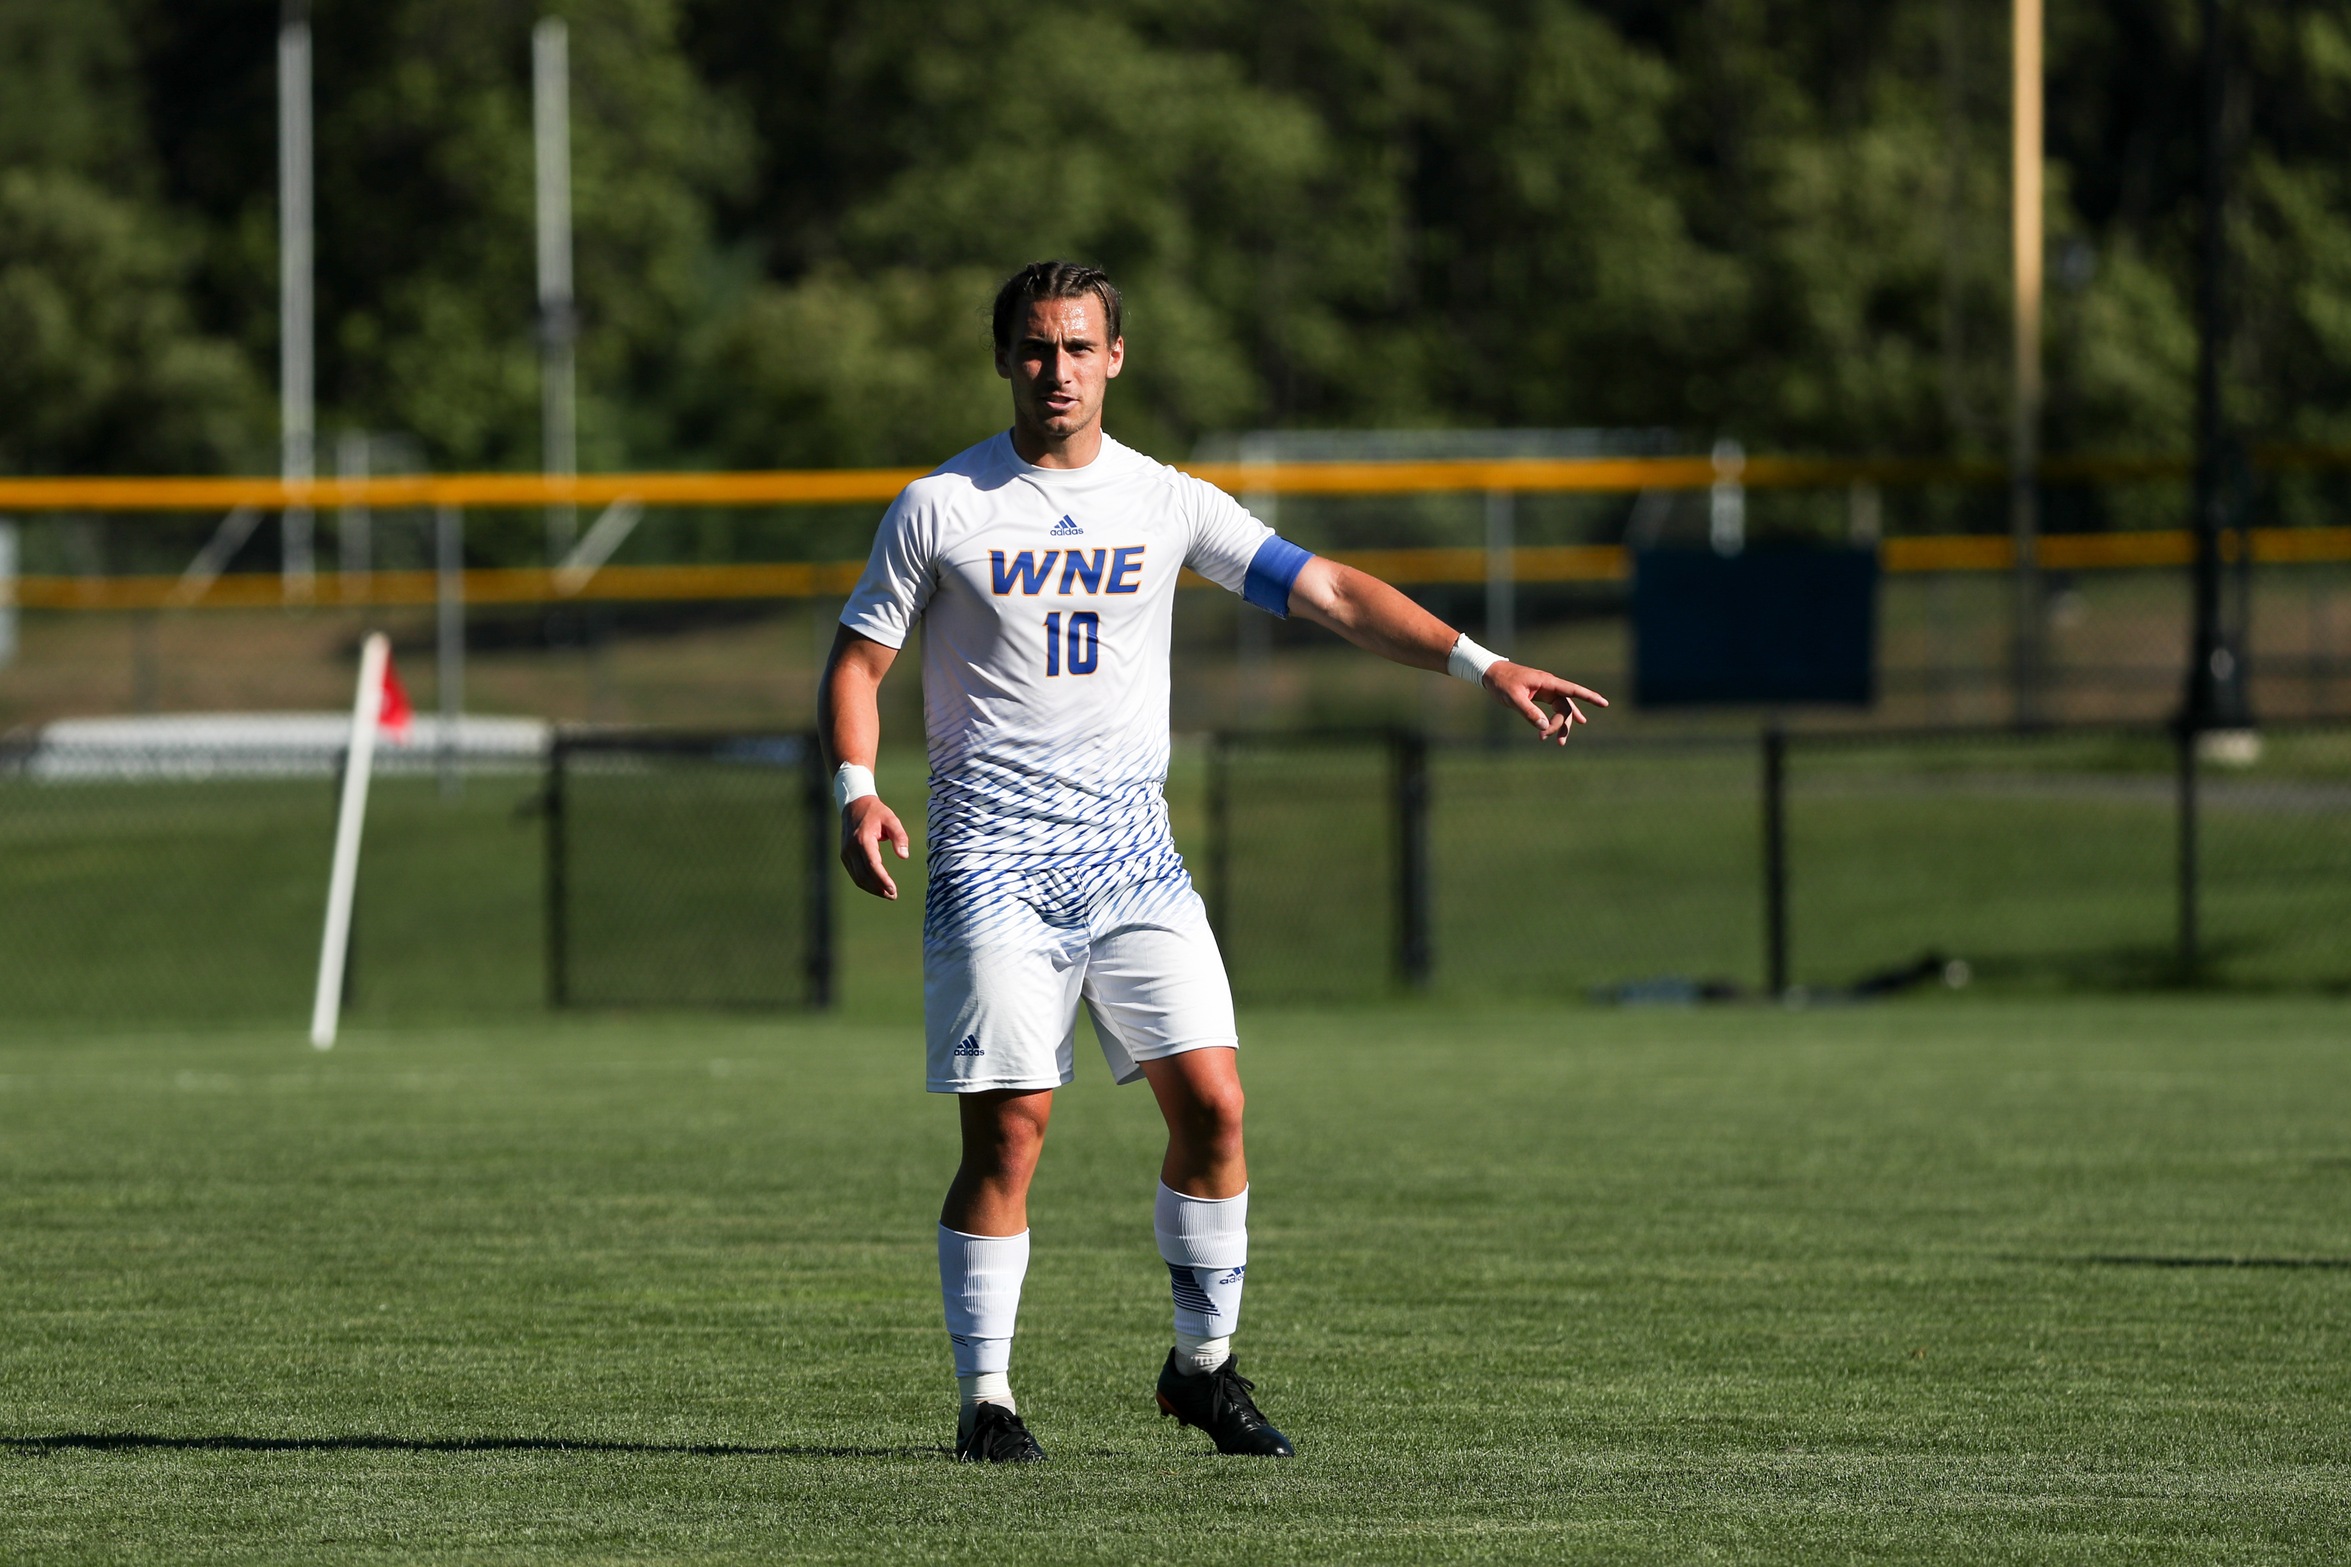 Men&rsquo;s Soccer&rsquo;s Sean O&rsquo;Neill Named to United Soccer Coaches All-Region Team